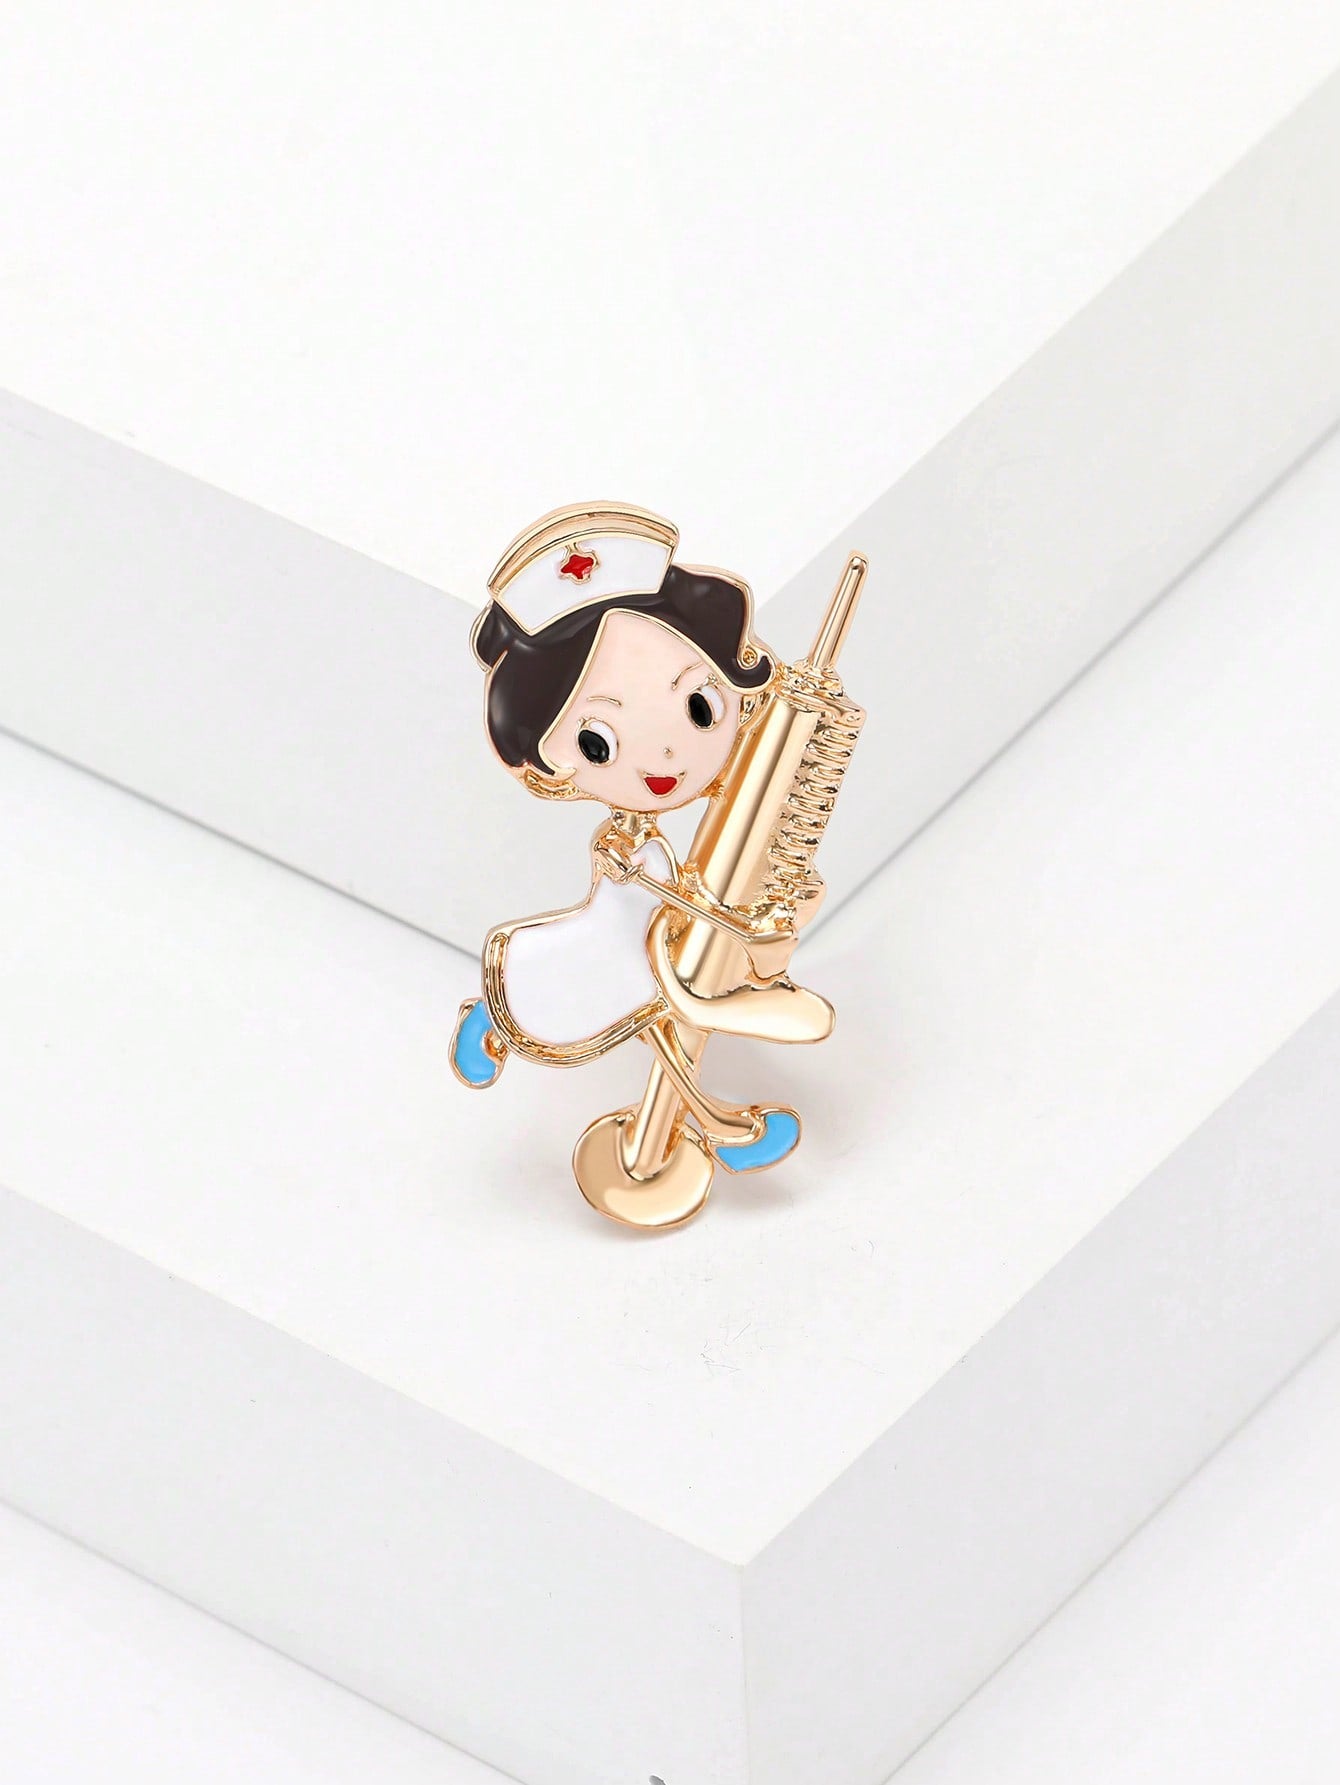 1pc Fashion Zinc Alloy Nurse Design Brooch For Women For Daily Life